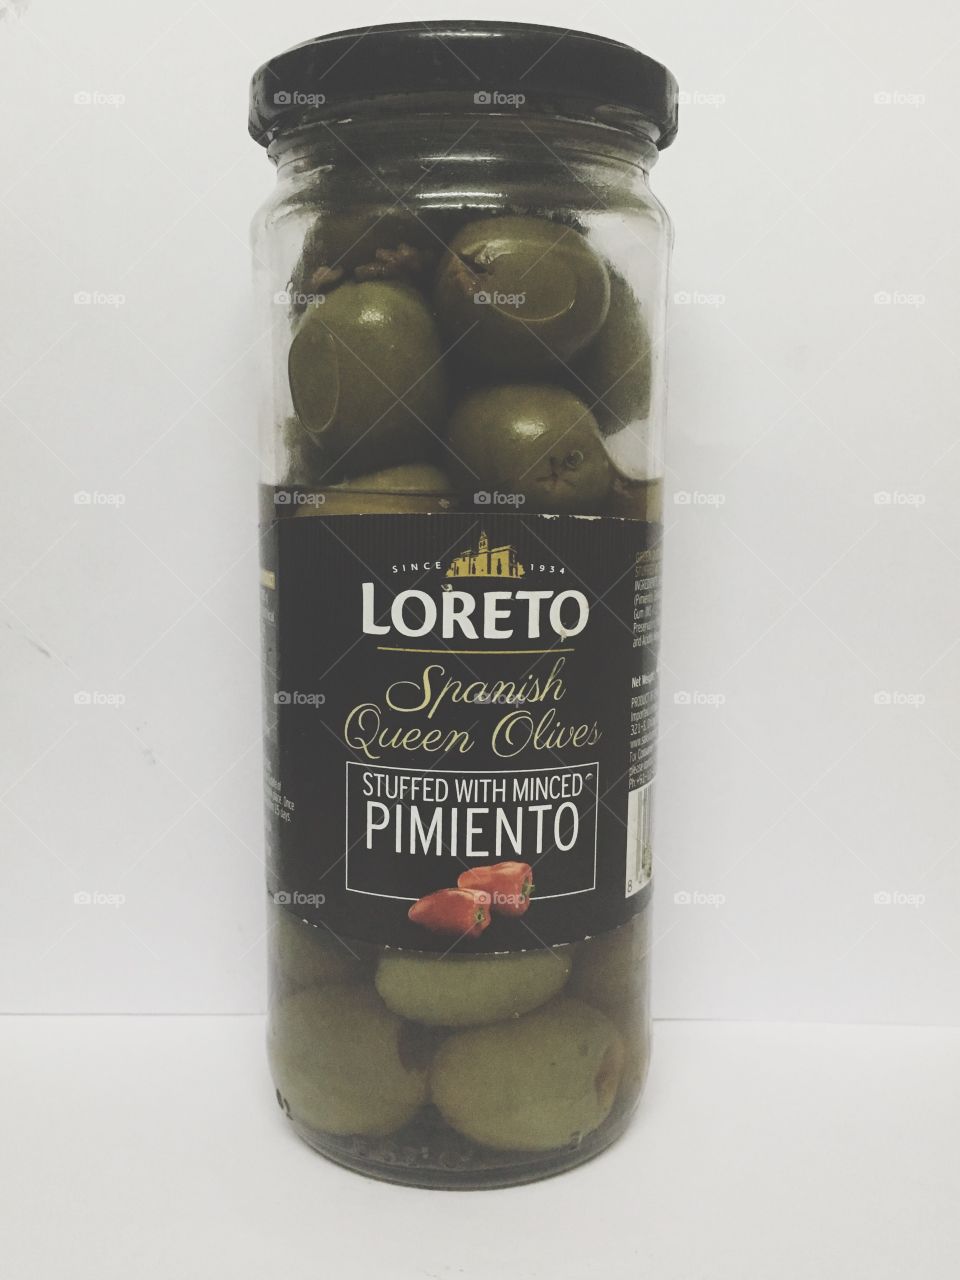 Loreto Spanish olives is the best thing on earth.